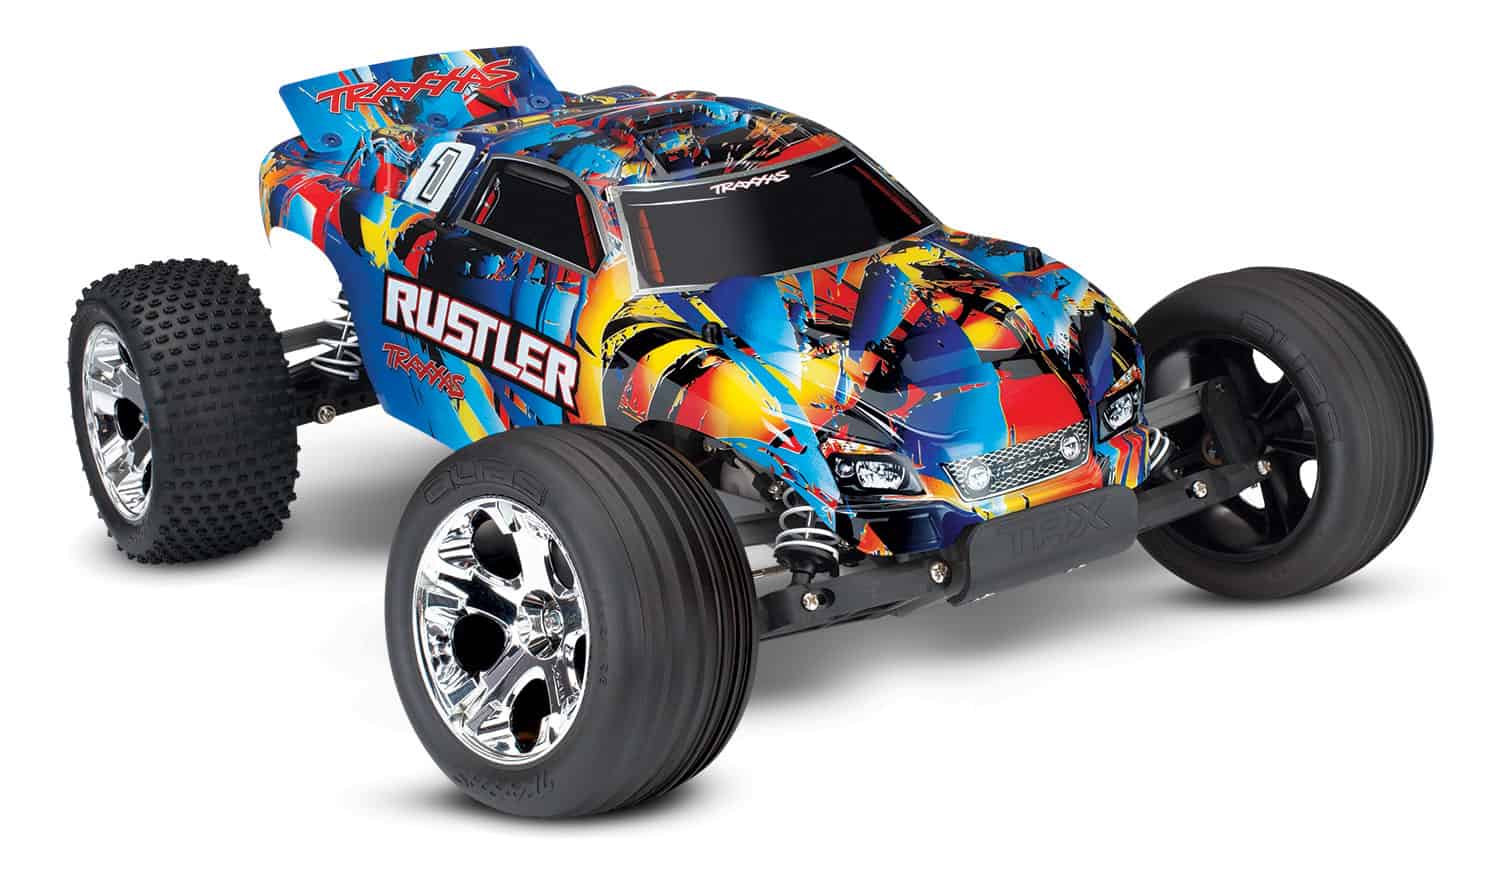 Traxxas Rustler - New Look and Lower Price